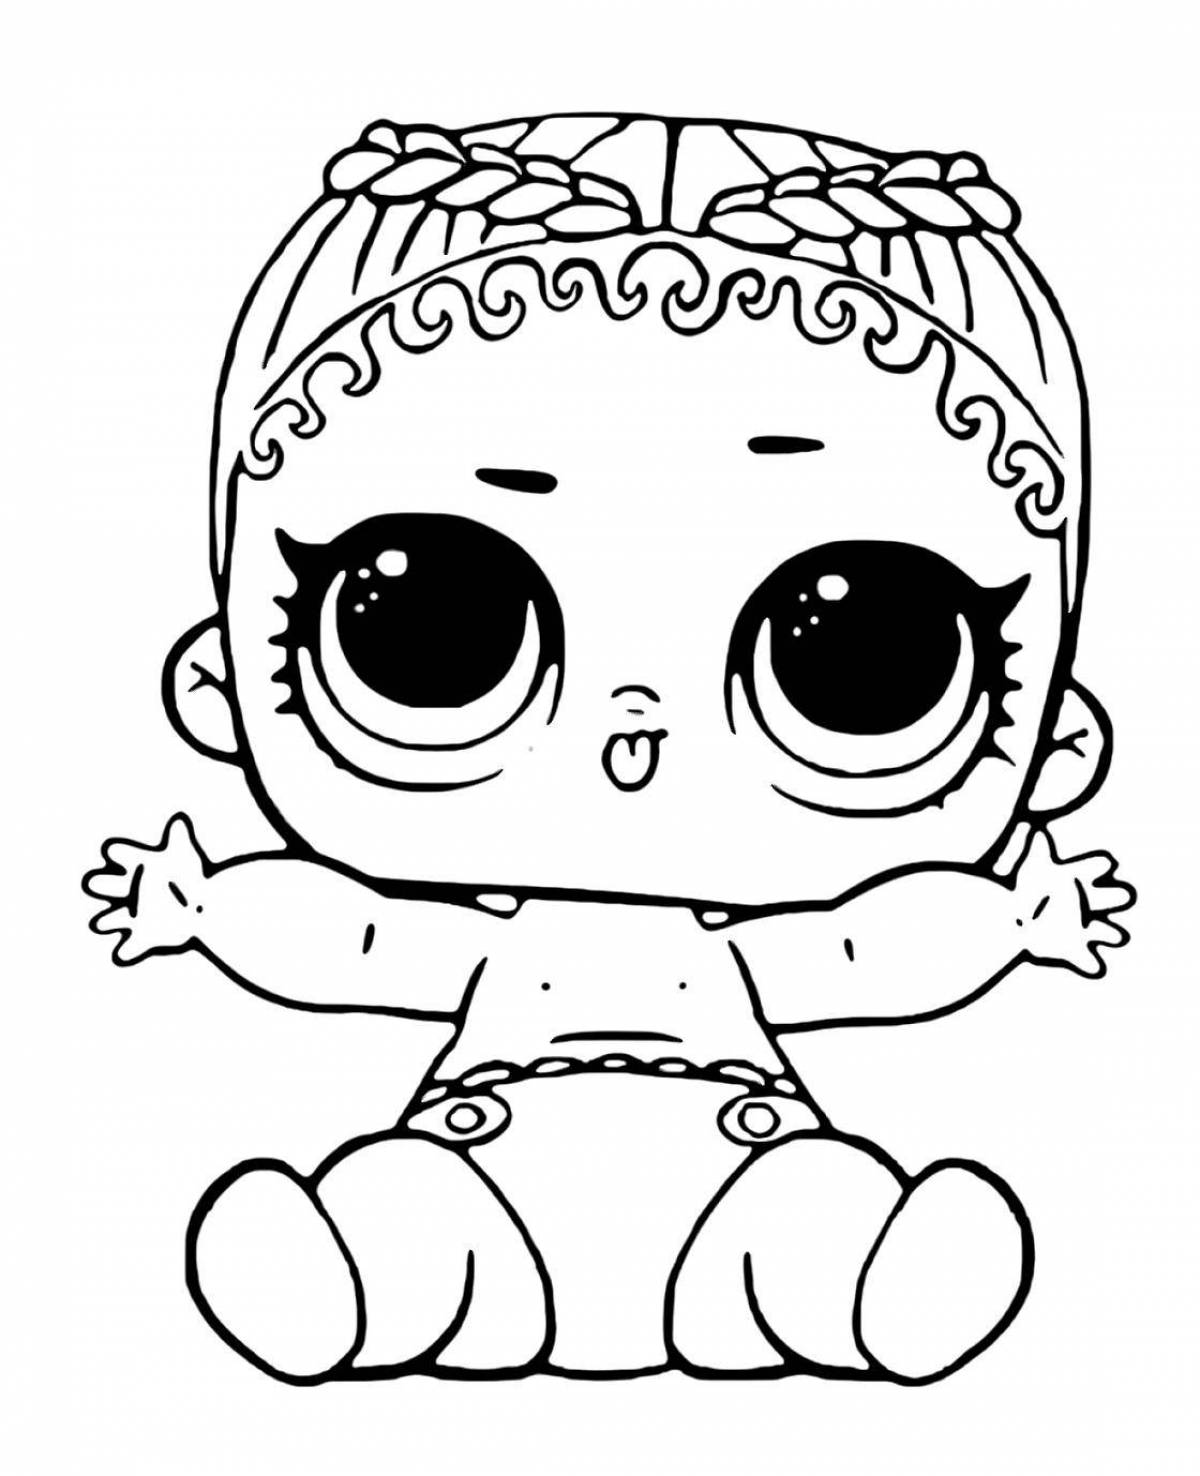 Cute little doll lol coloring book